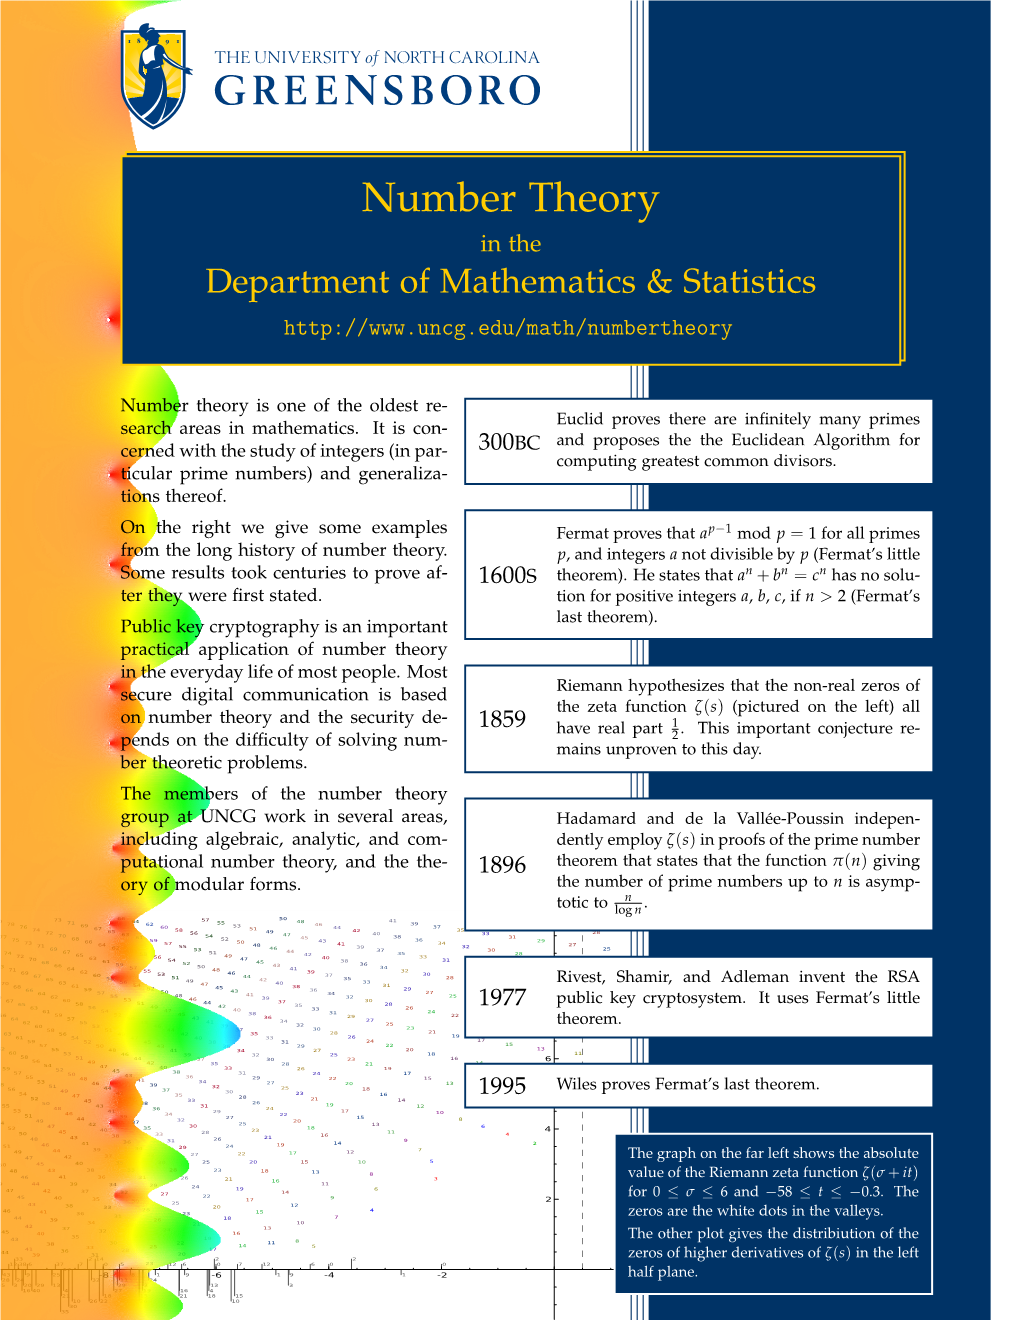 Number Theory in the Department of Mathematics & Statistics